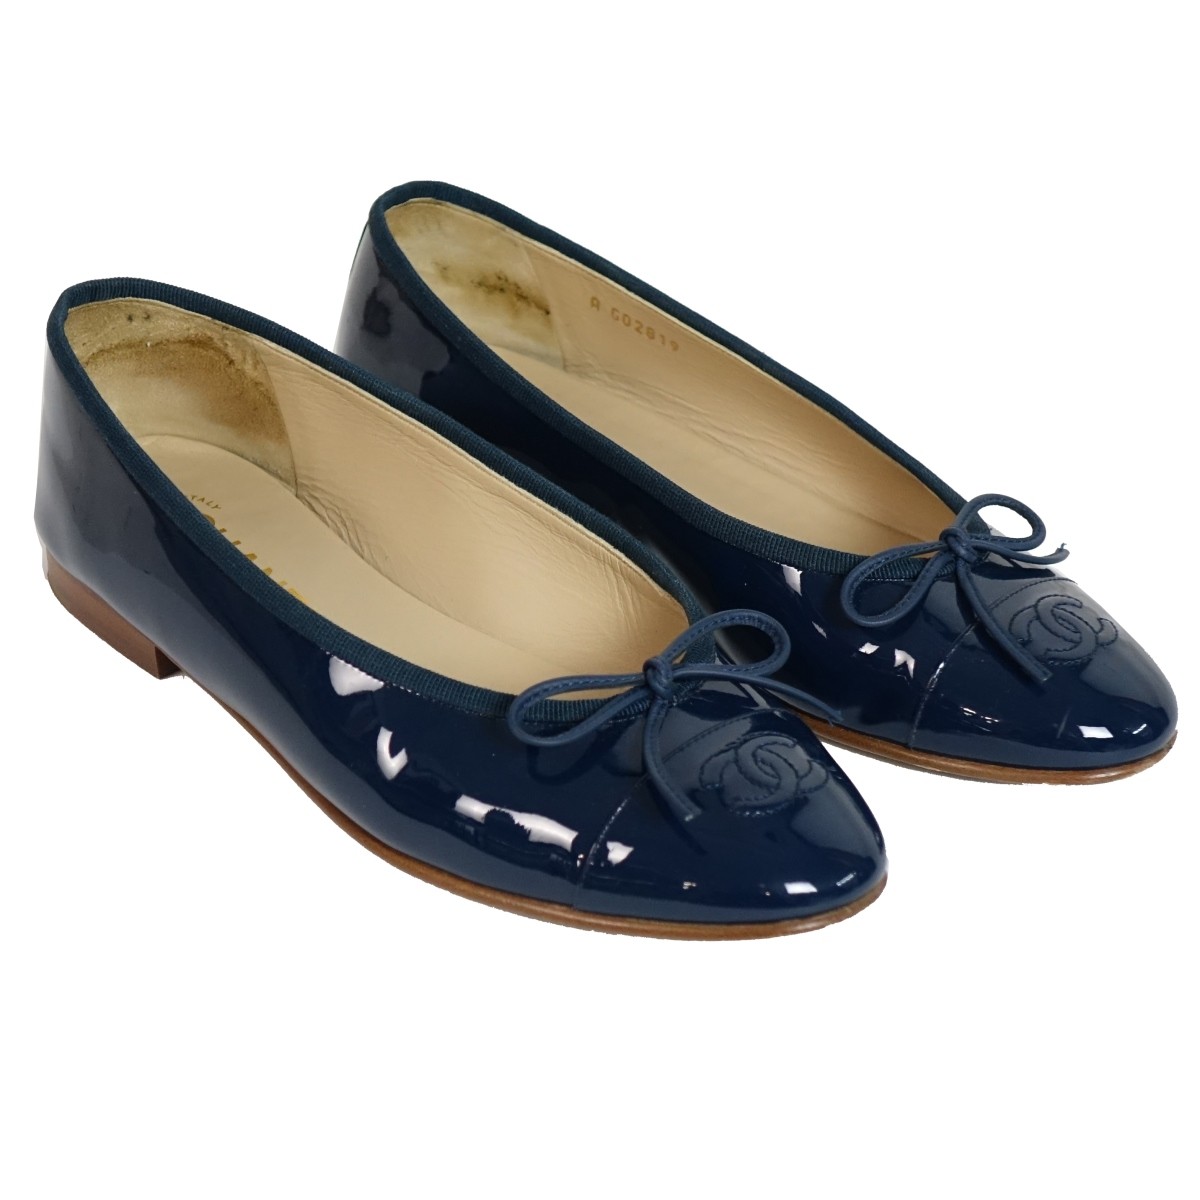 Chanel Patent Leather Ballet Flats